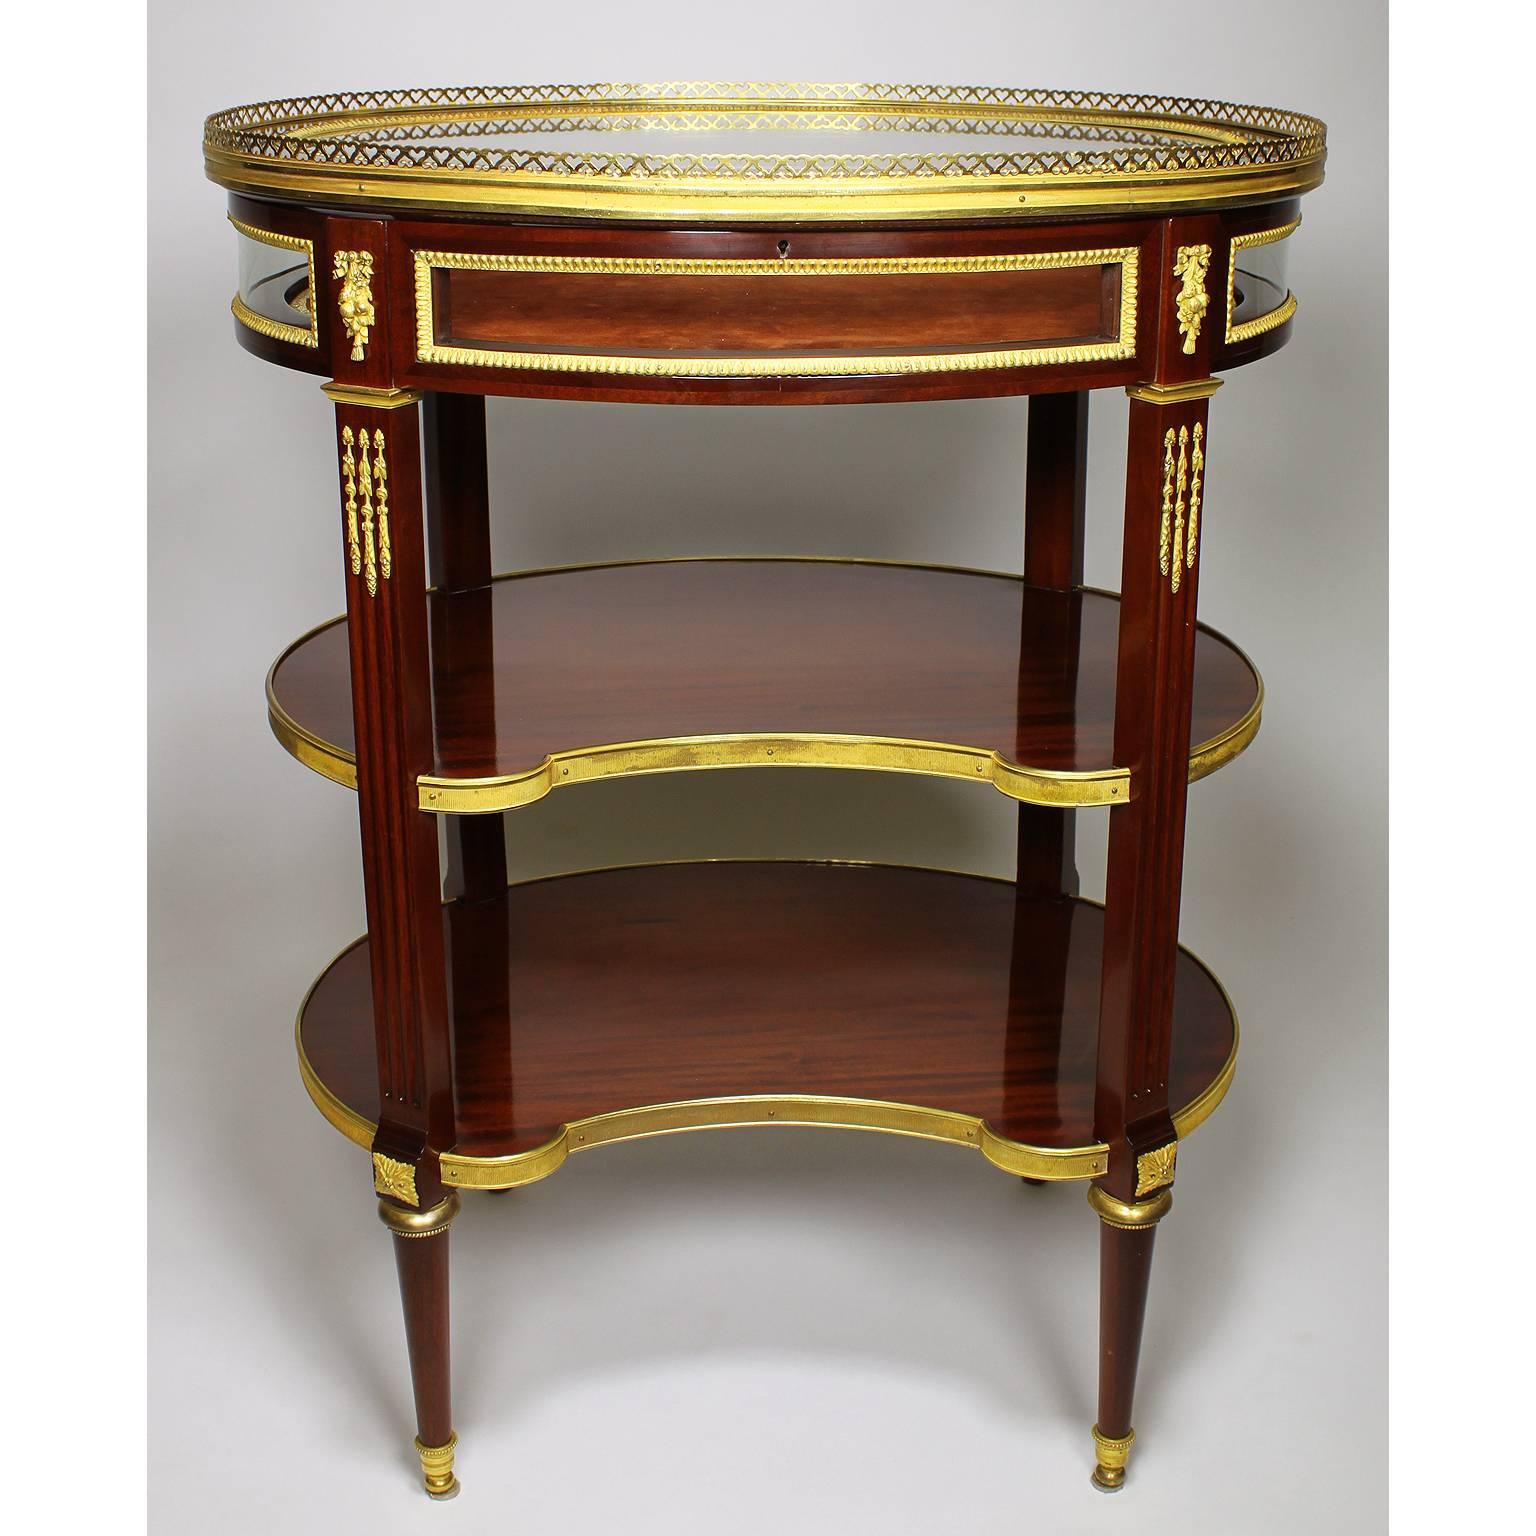 A fine French 19th-20th century Louis XVI style Belle Époque ormolu-mounted mahogany ovoid vitrine table, attributed to François Linke (1855-1946), with a bevelled glass lift top surmounted with a pierced gilt bronze gallery in the shape of hearts